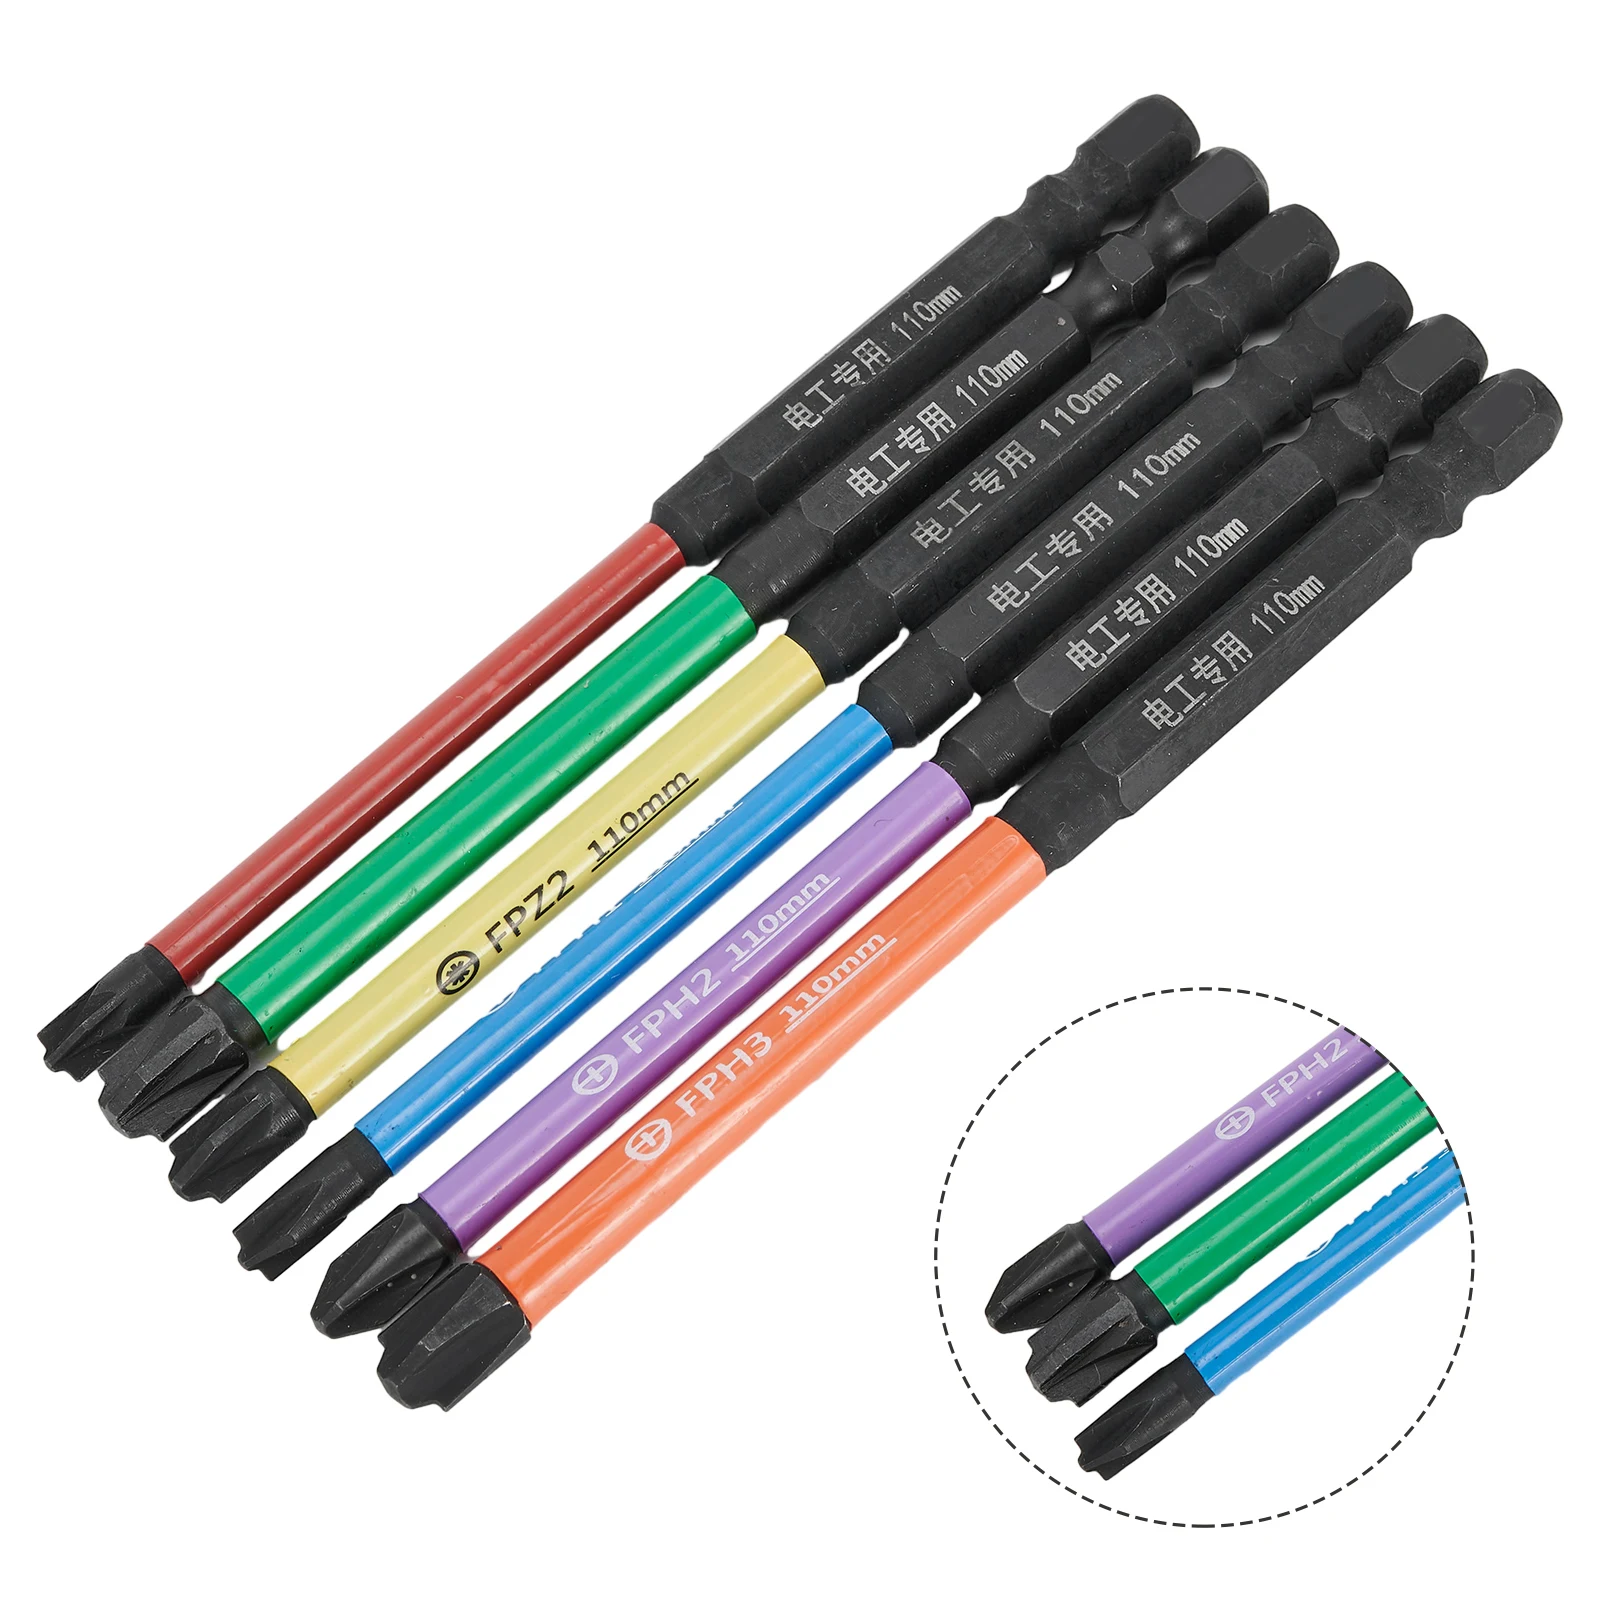 

Durable And Practical High Quality Screwdriver Bits 110mm / 4.33’’ Length 6 Pcs/set Alloy Steel FPH1/FPH2/FPH3/FPZ1/FPZ2/FPZ3